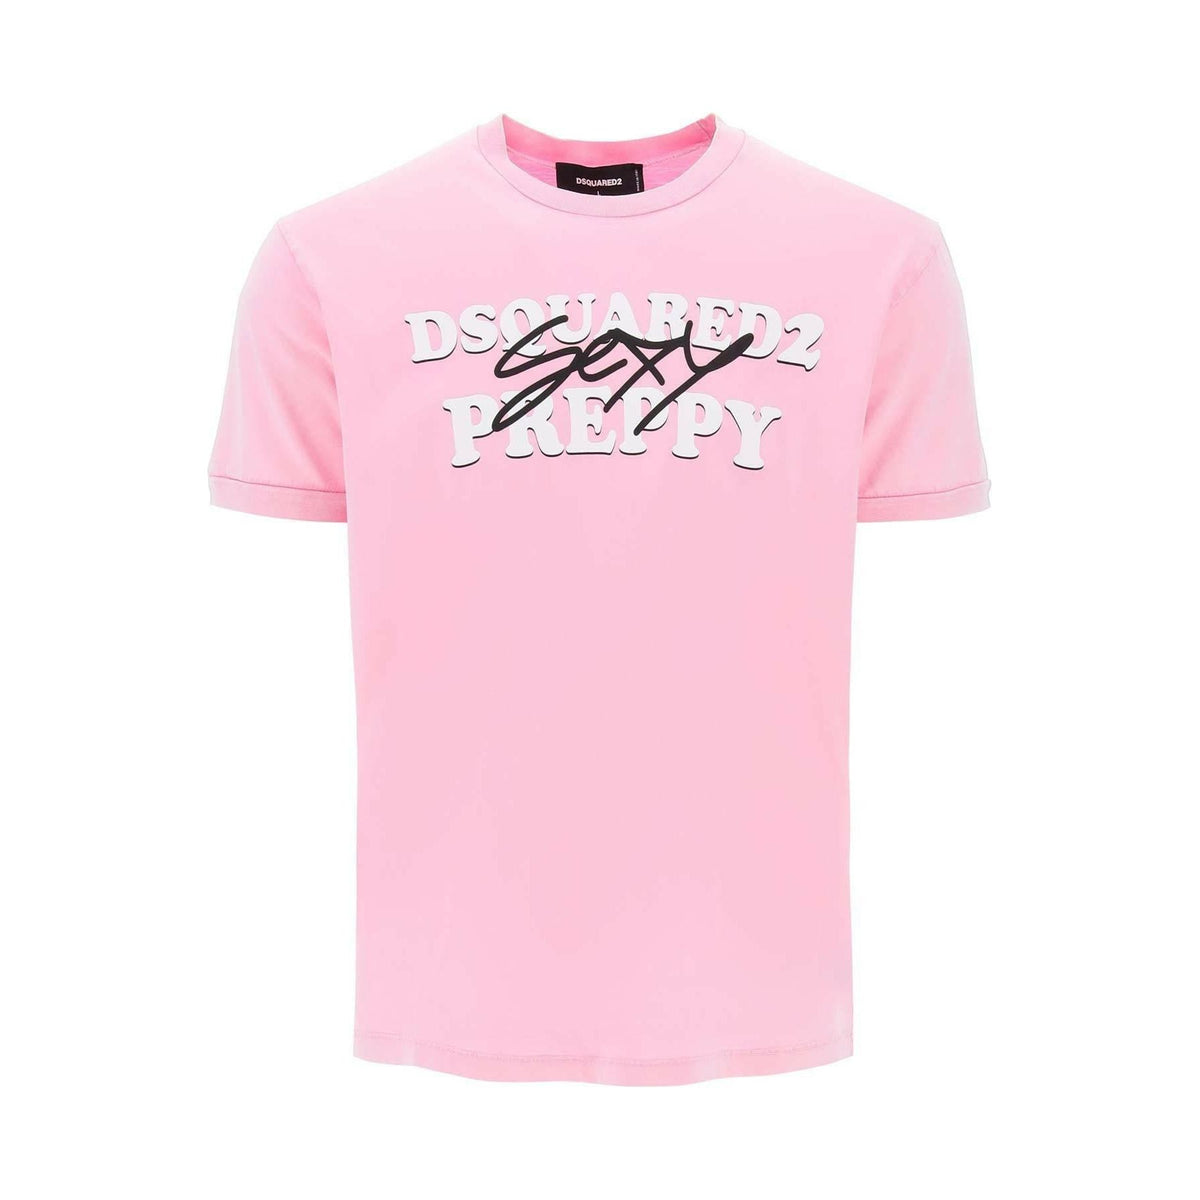 Pink Sexy Preppy Muscle Fit Cotton T-Shirt DSQUARED2 JOHN JULIA.